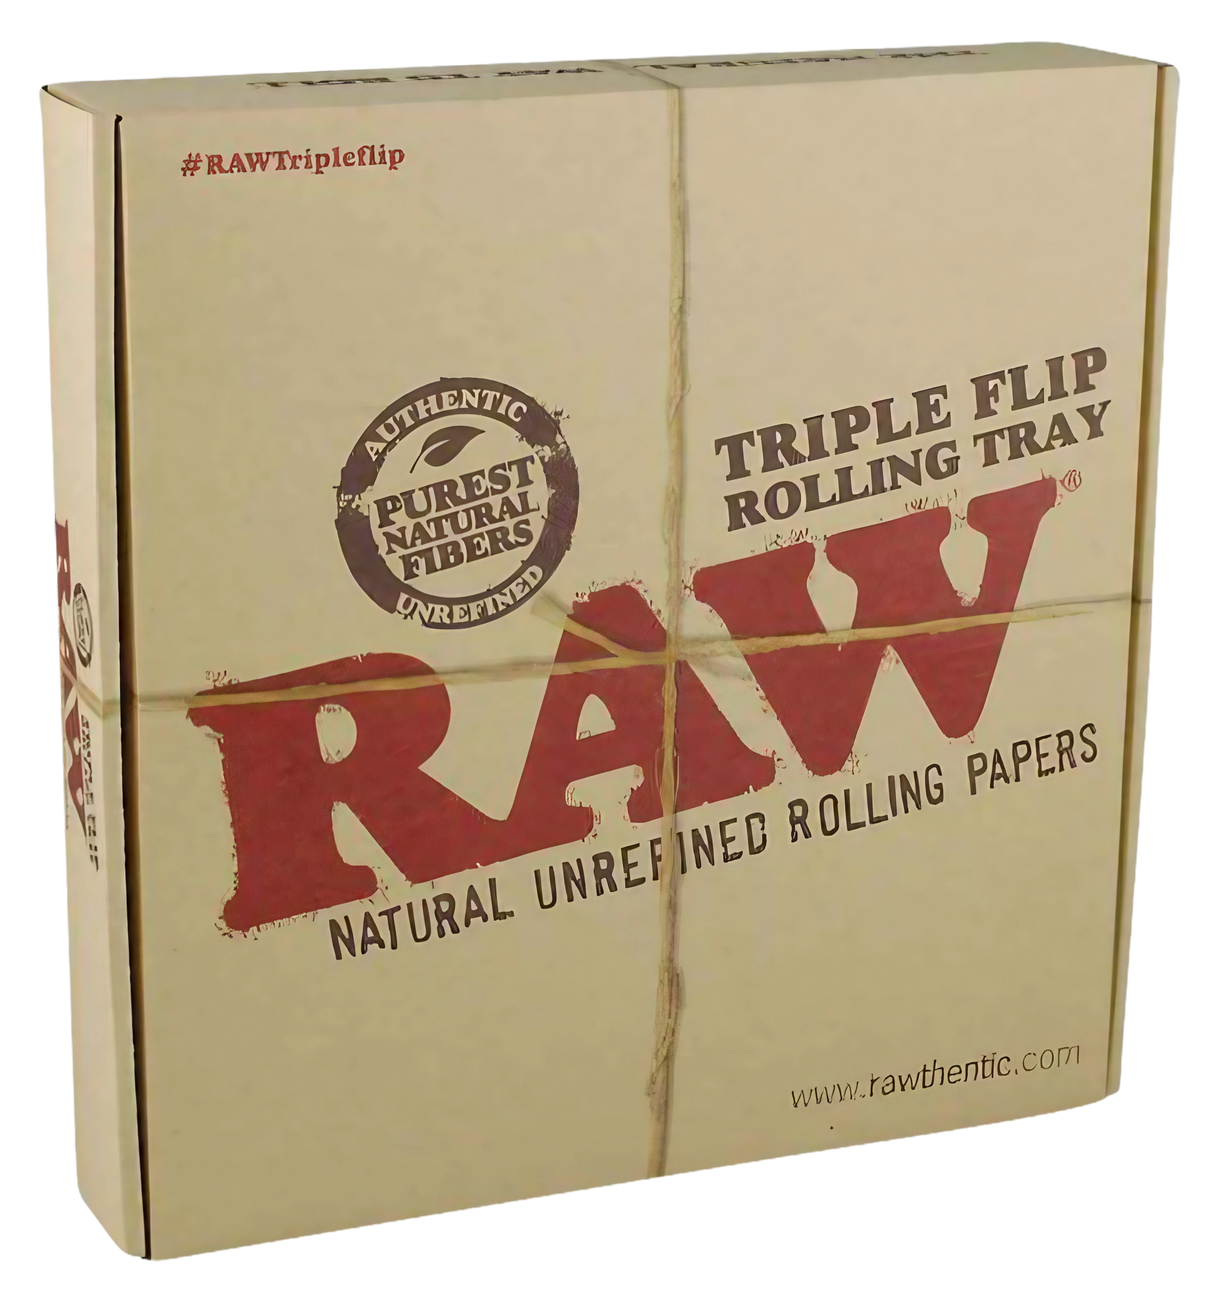 RAW Triple Flip Rolling Tray in closed box, wooden material, 10"x10.5" size, front view